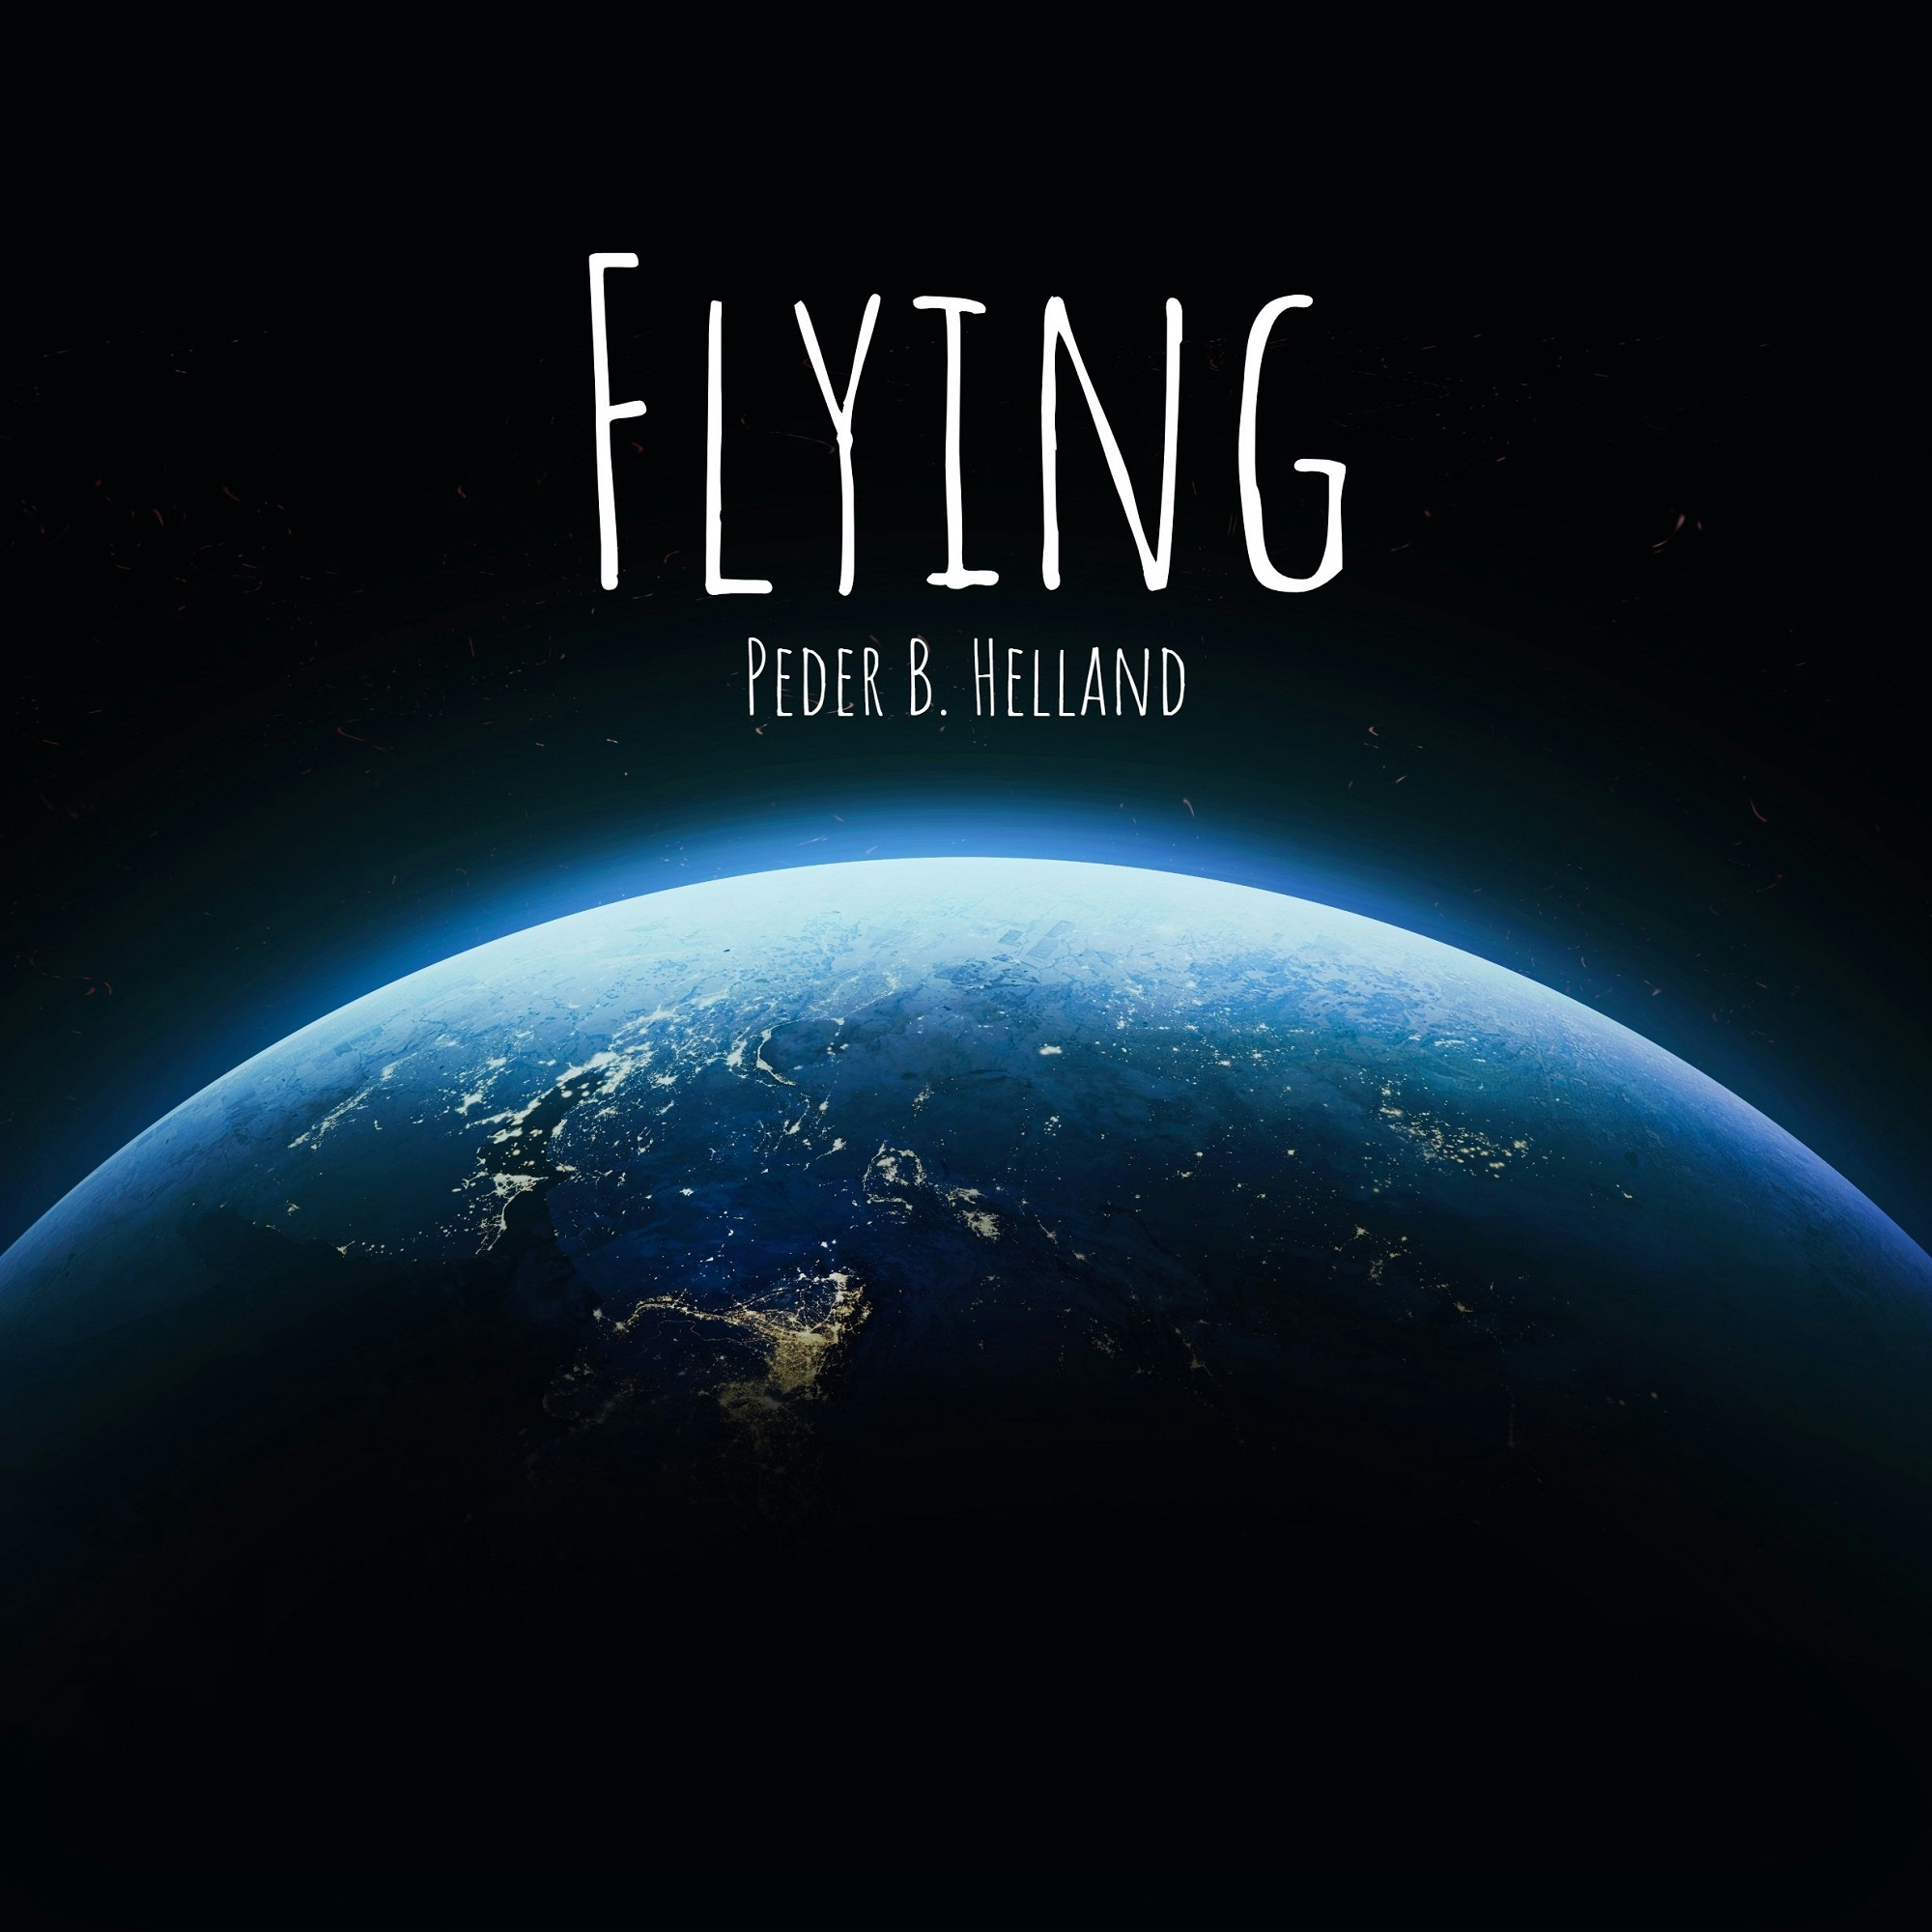 Cover art for the single Flying by Peder B. Helland